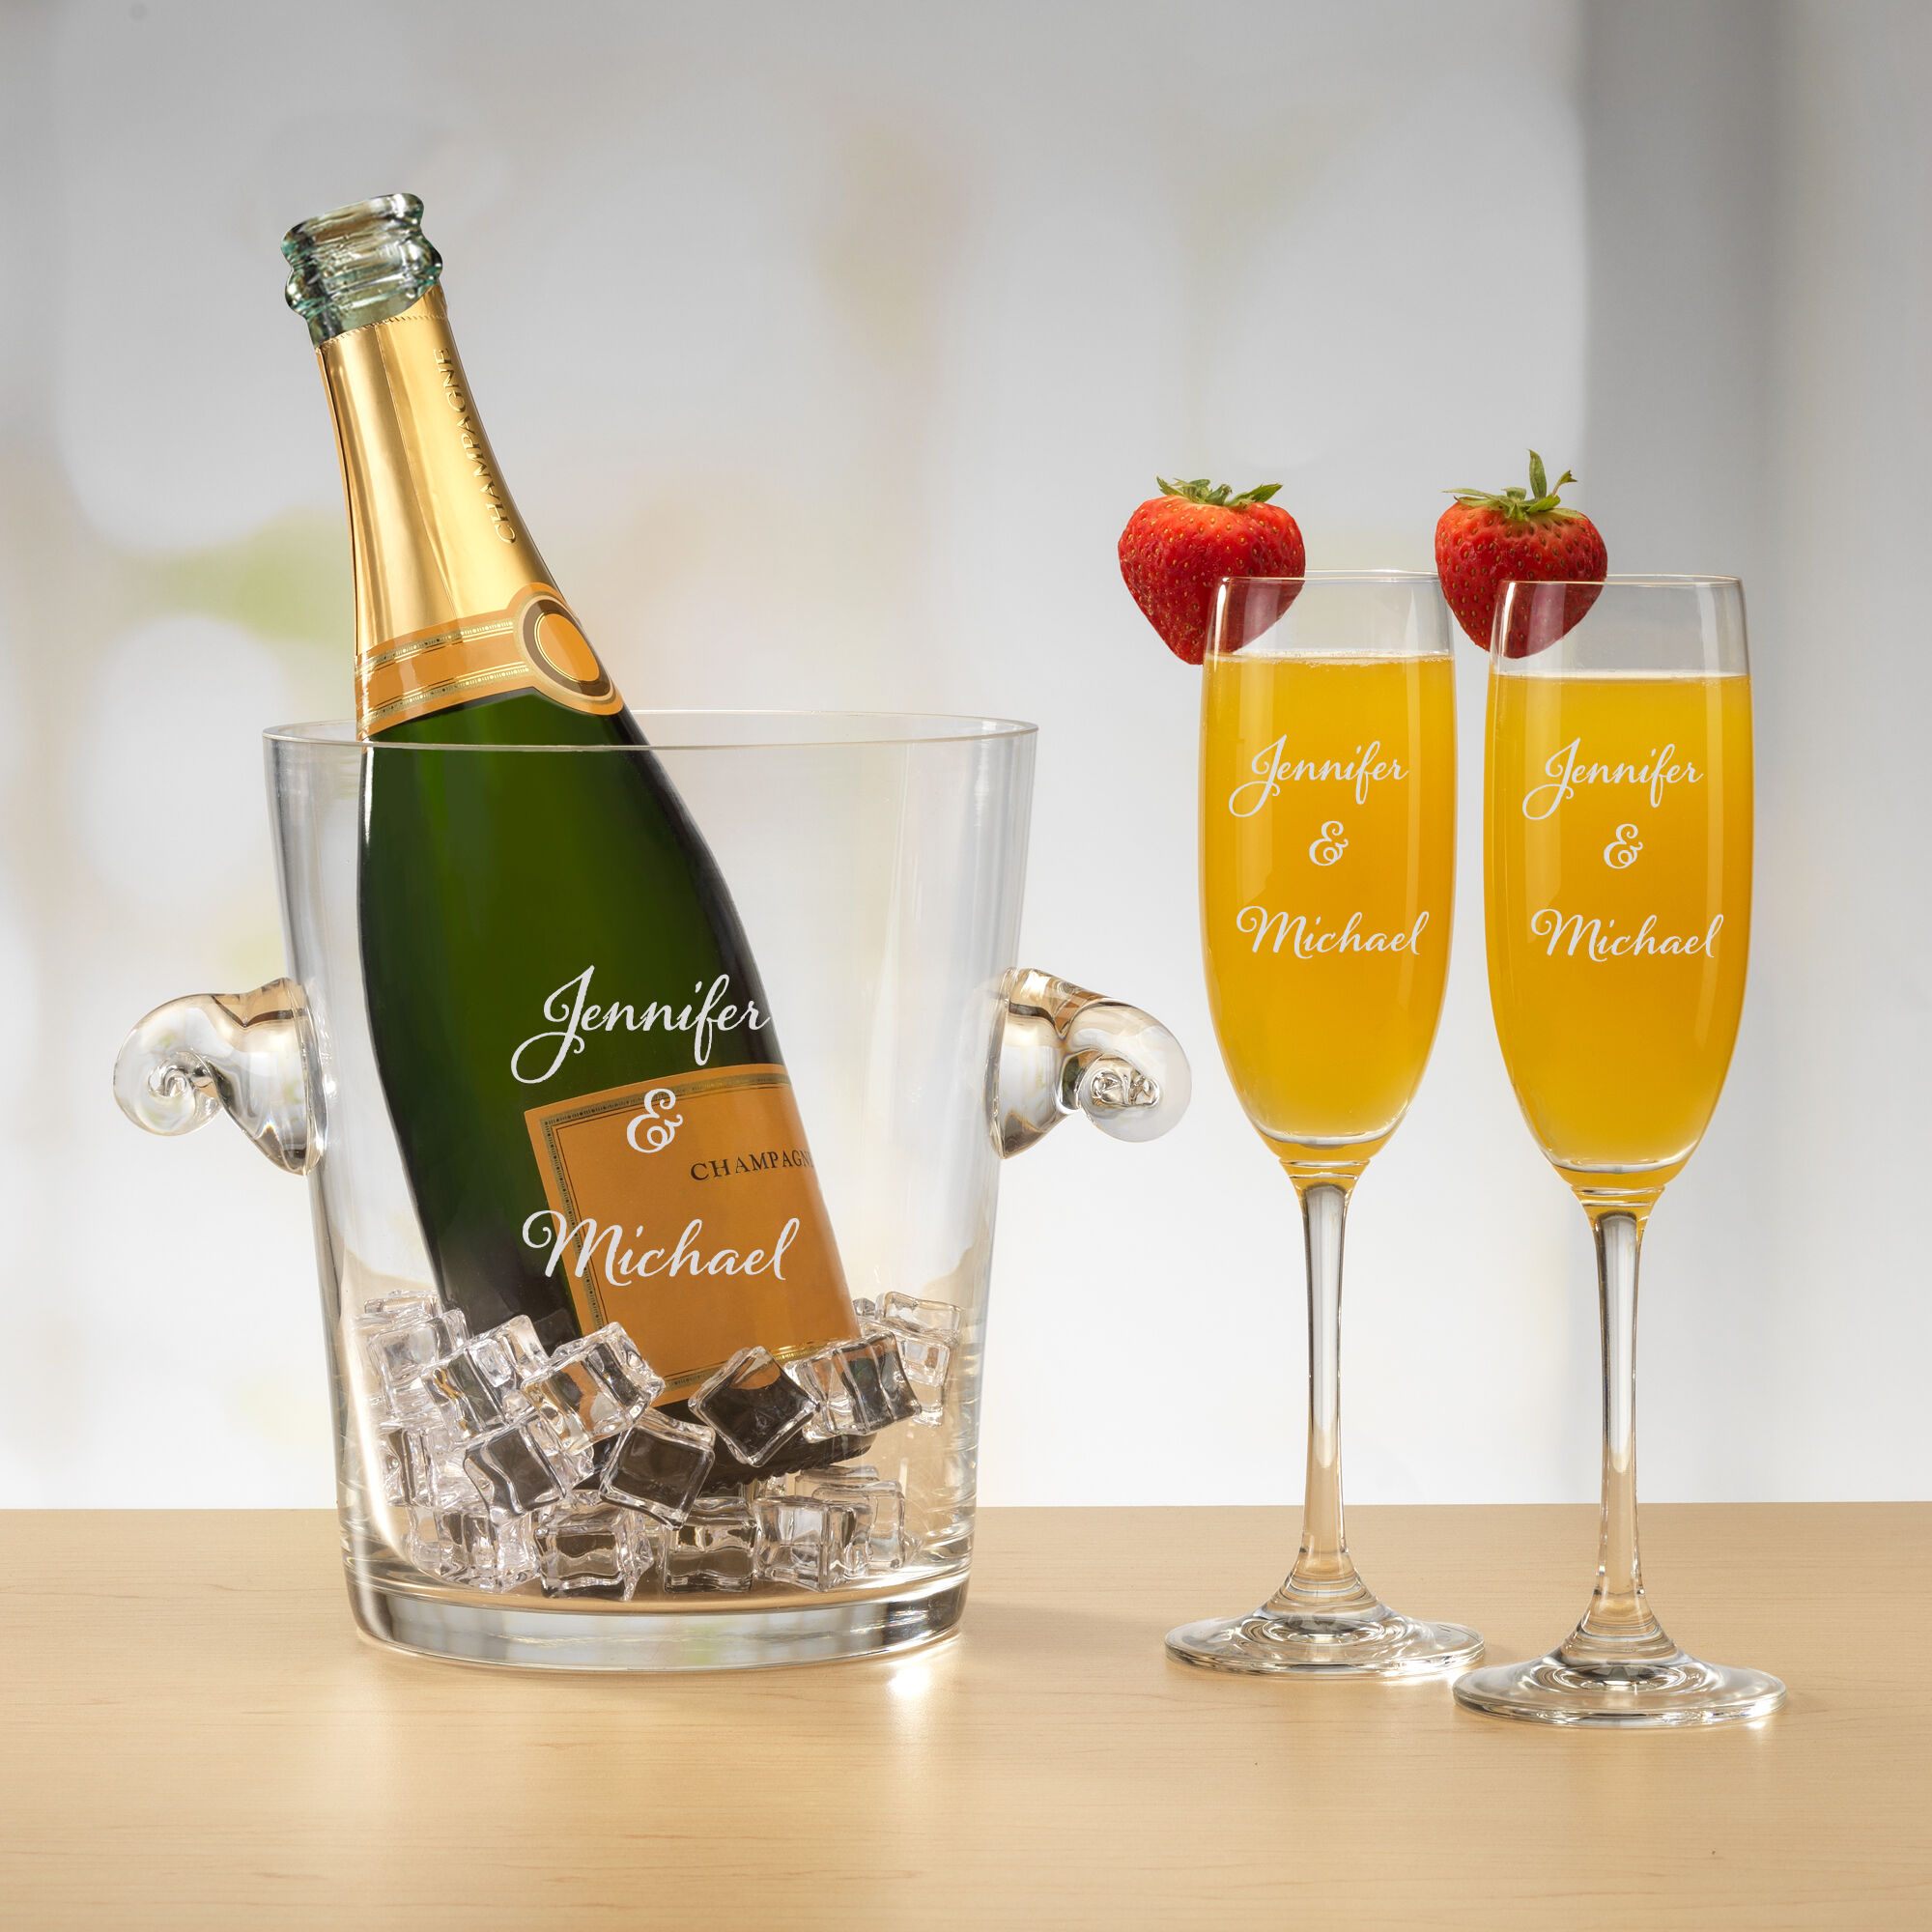 The Personalized Couples Champagne Set 10036 0023 d mimosa